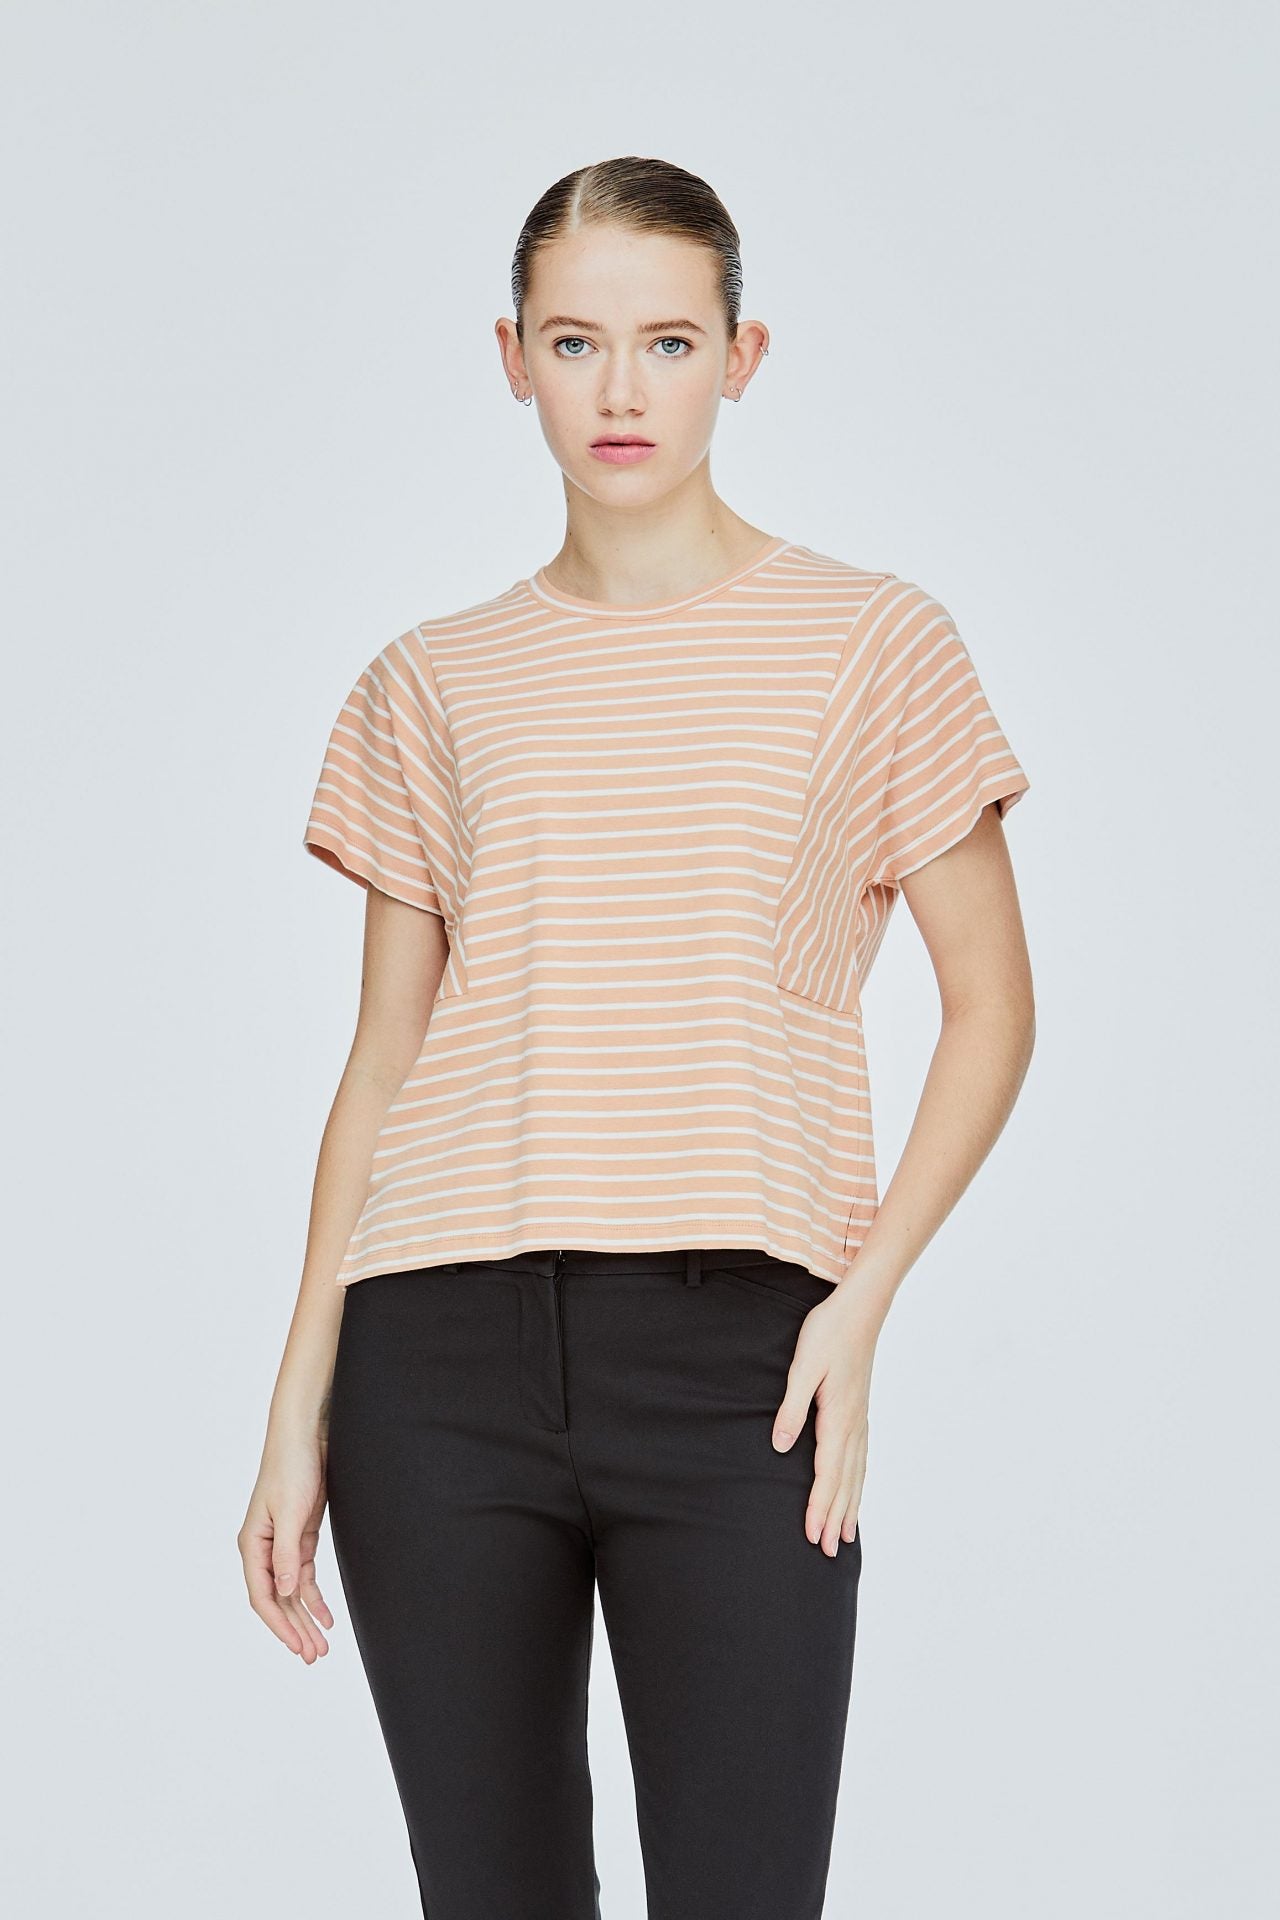 AT 11416 CONTRAST STRIPES TEE PEACH